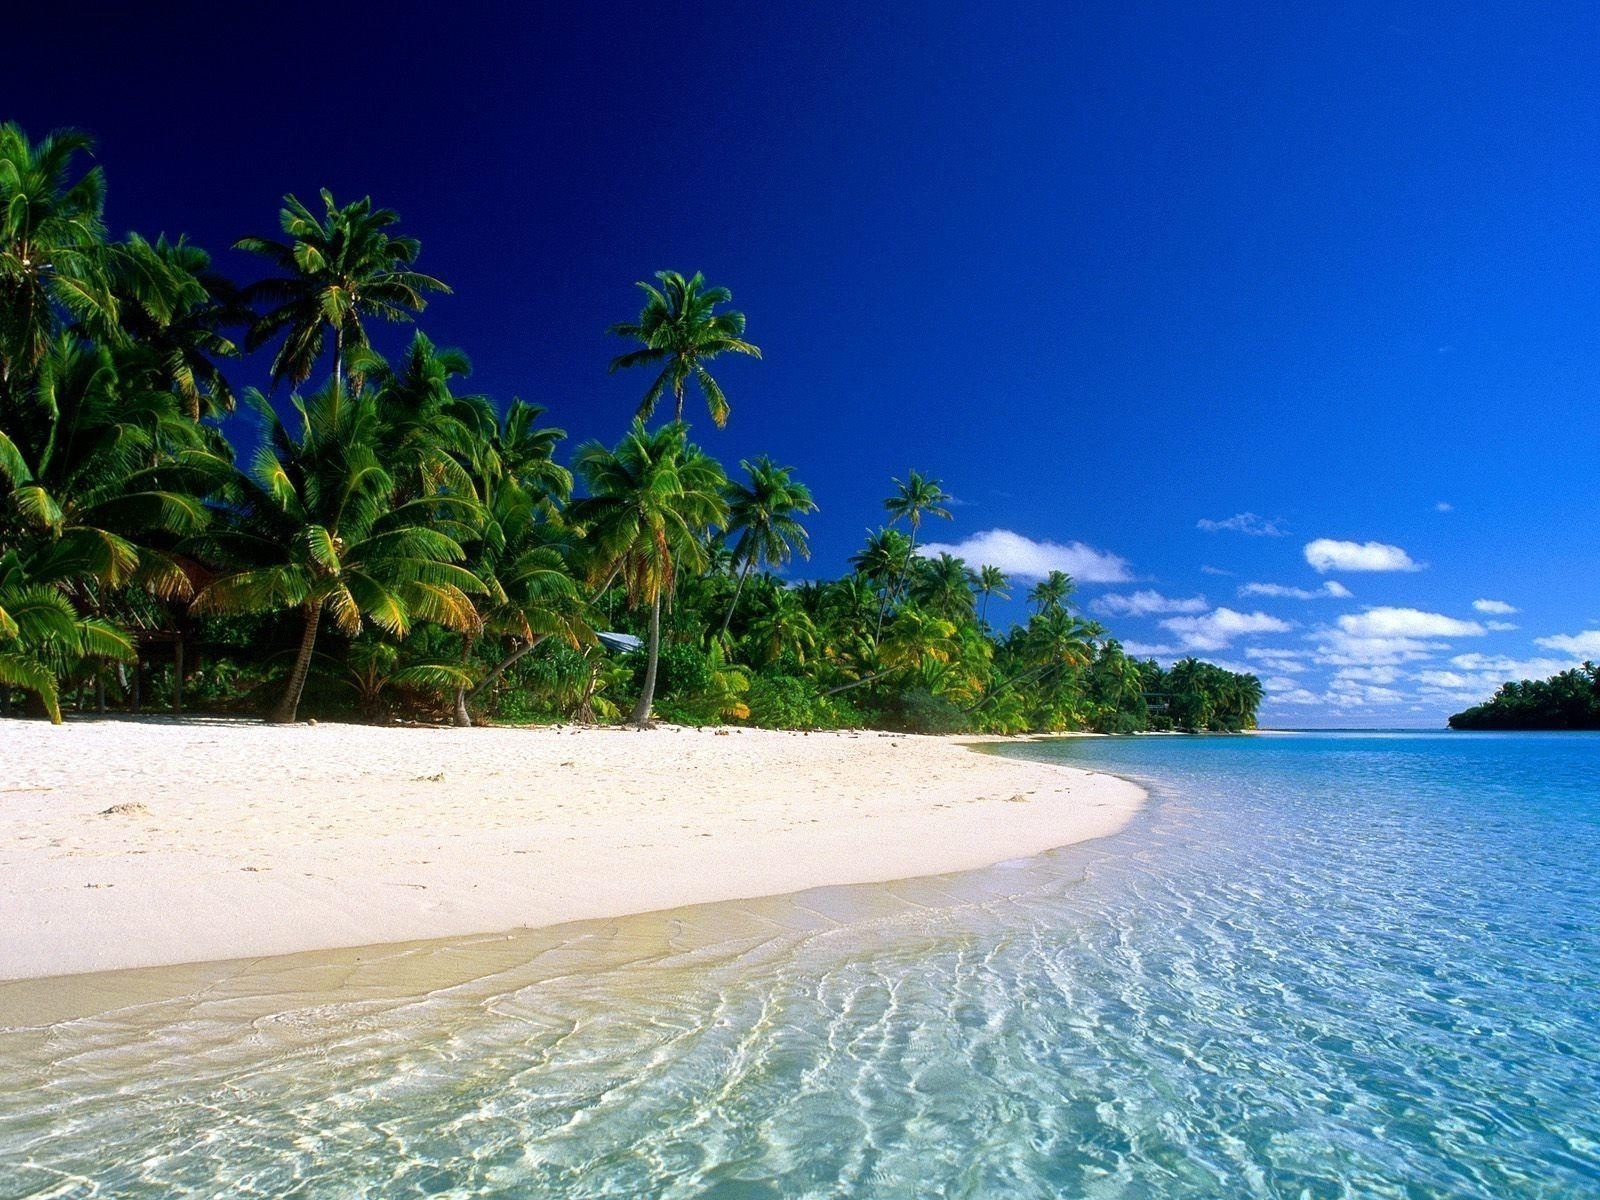 10 Top Beautiful Beaches In The World Wallpaper FULL HD 1080p For PC Desktop